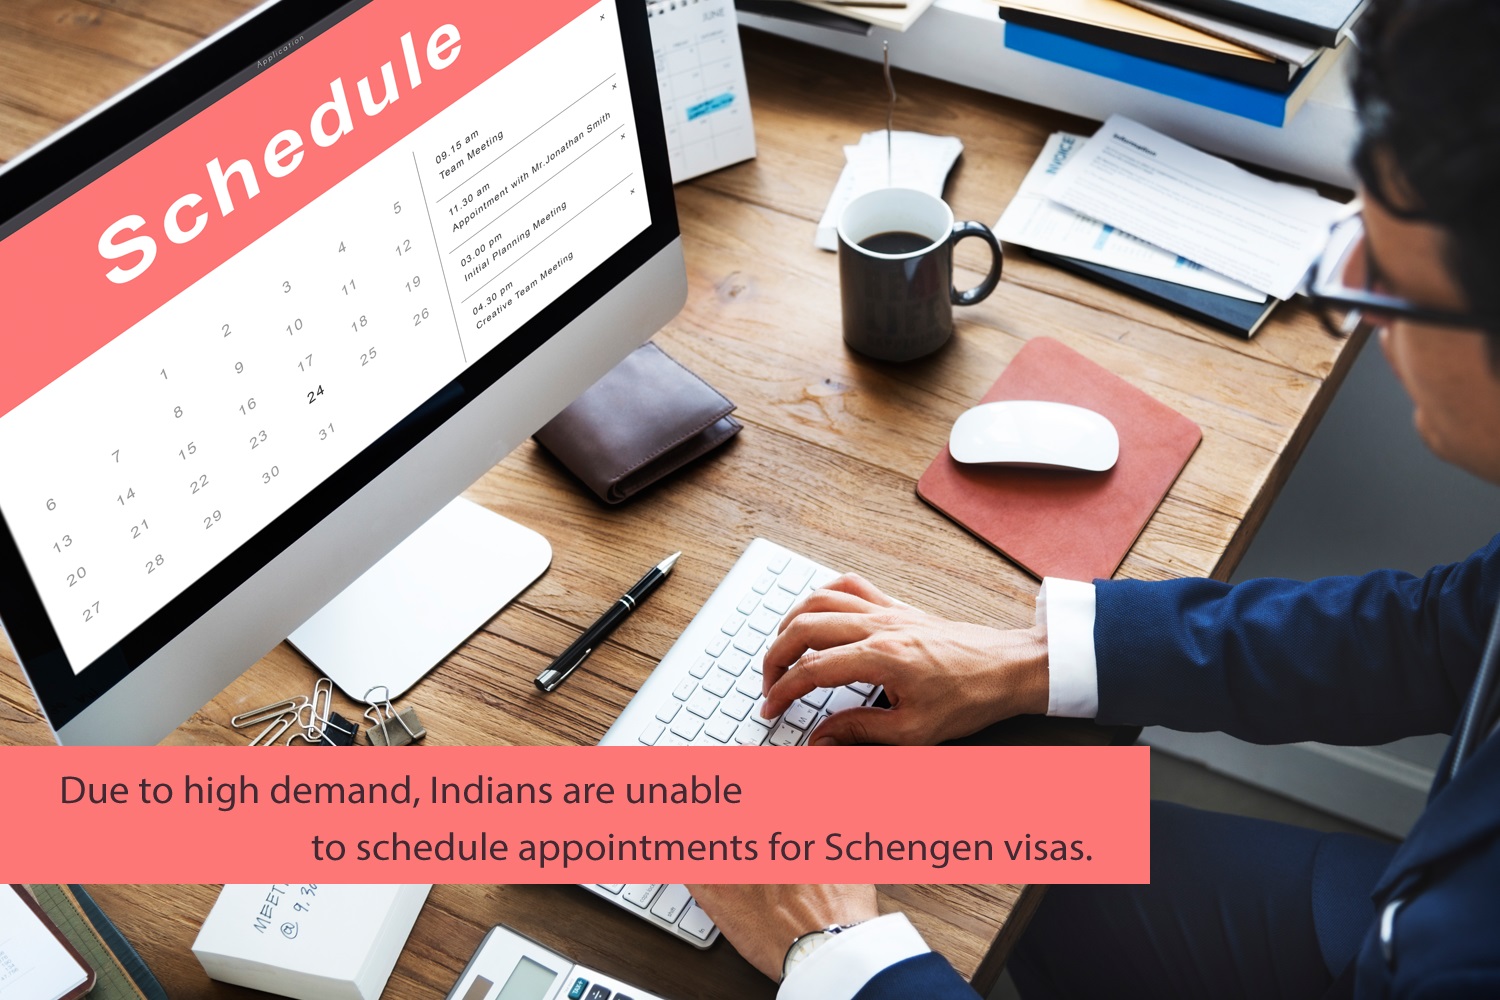 Due to high demand, Indians are unable to schedule appointments for Schengen visas.